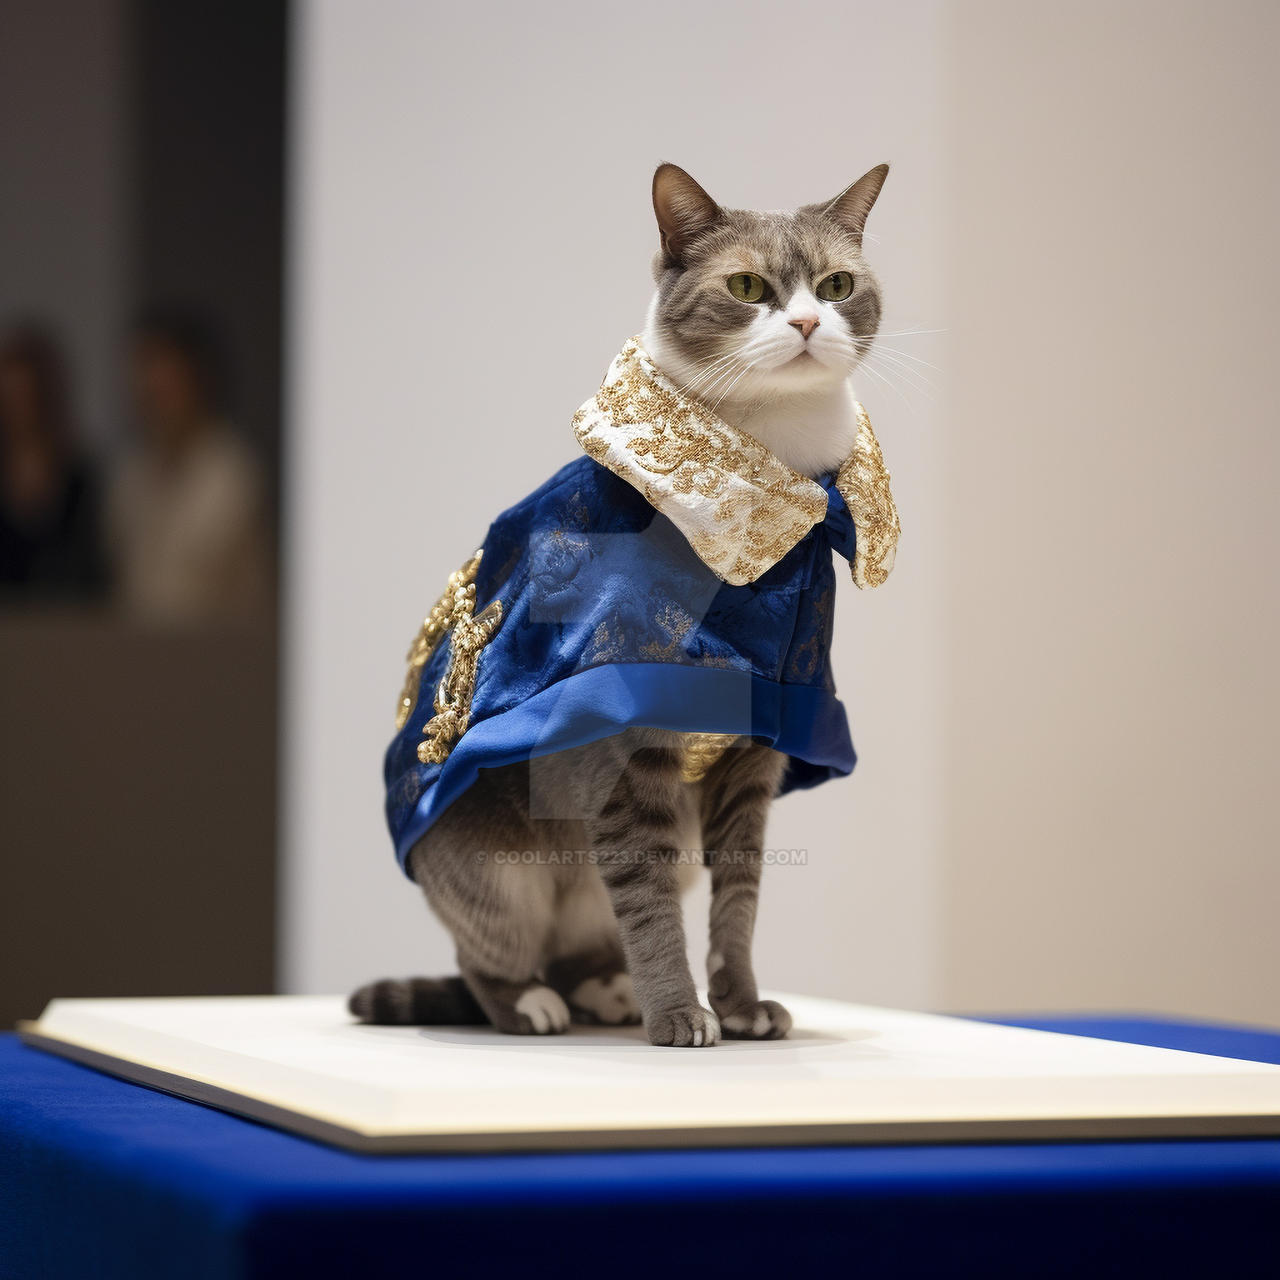 Cat wearing clothes on podium. Fashion show by Coolarts223 on DeviantArt